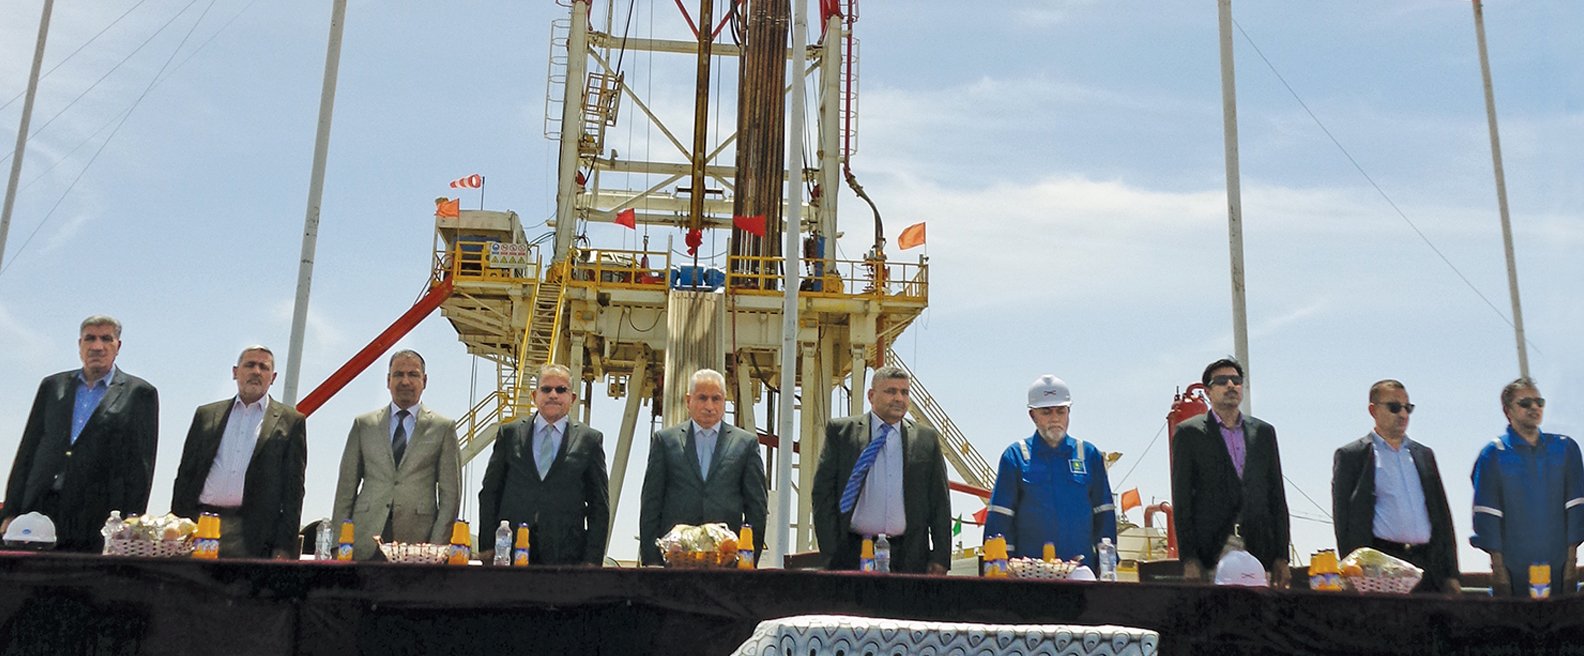 Rig at first exploratory well Madian-1 PPL-operated Block 8 Iraq